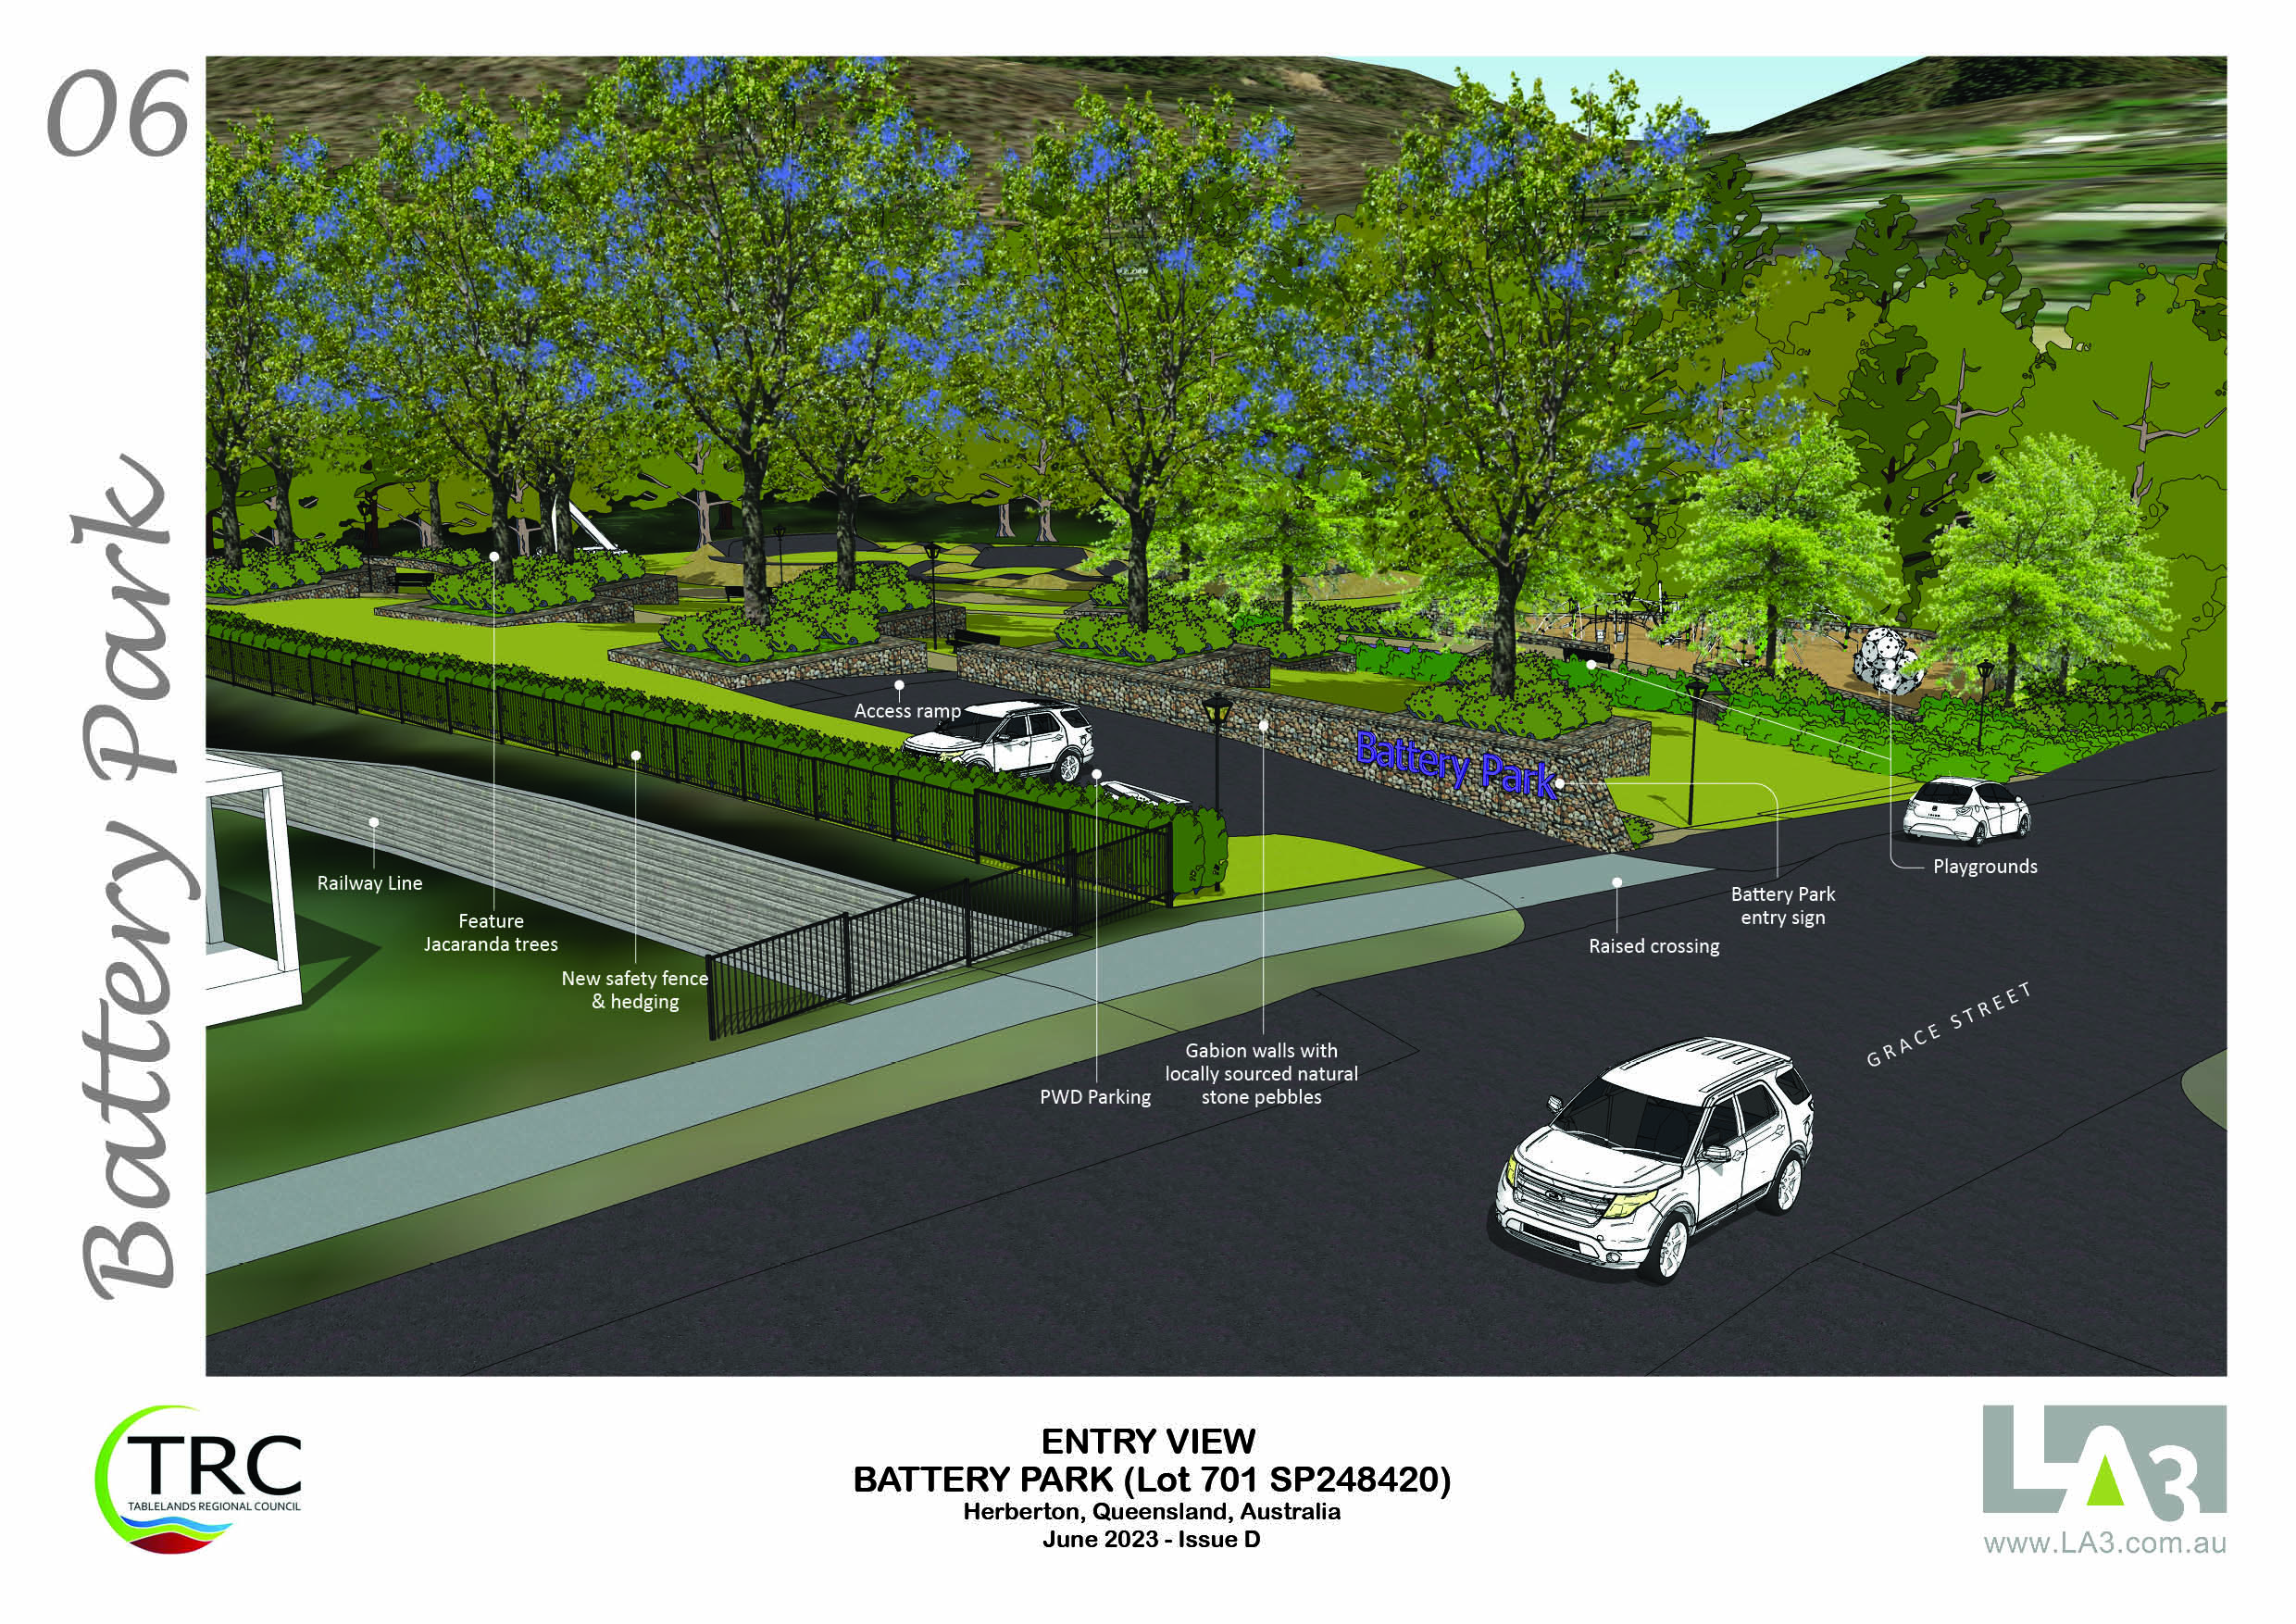 An artist impression of a road, car park and footpaths at Herberton Battery Park